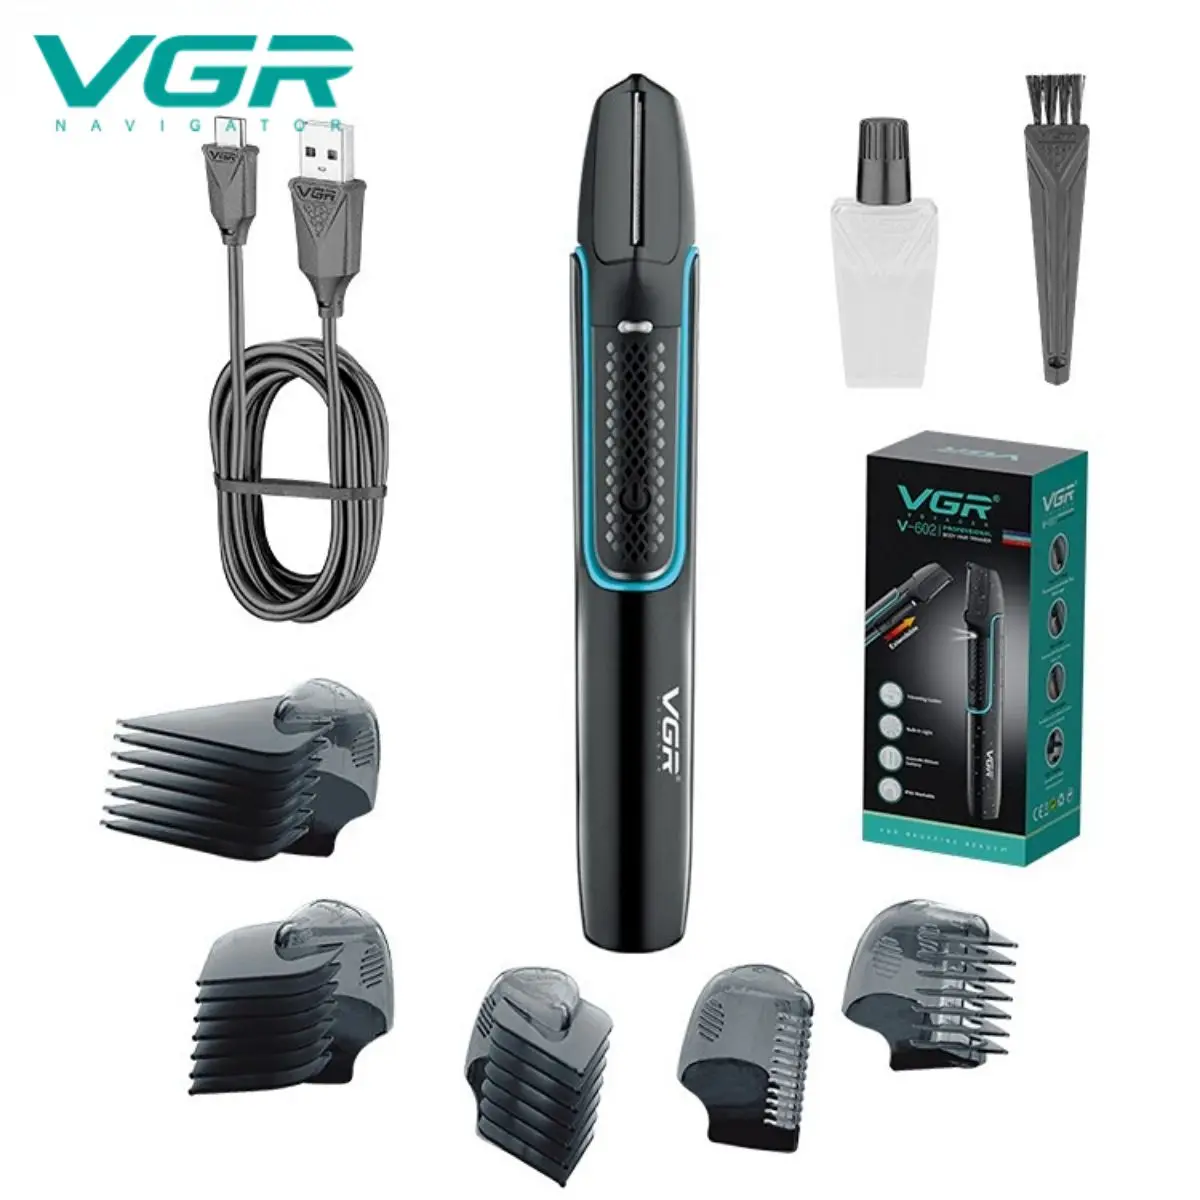 Hair Clippers for Men, VGR Hair Clipper Rechargeable Hair Trimmer Professional Hair Cutting Machine Electric Beard Trimmer Cordless LED Display V-947 - 5